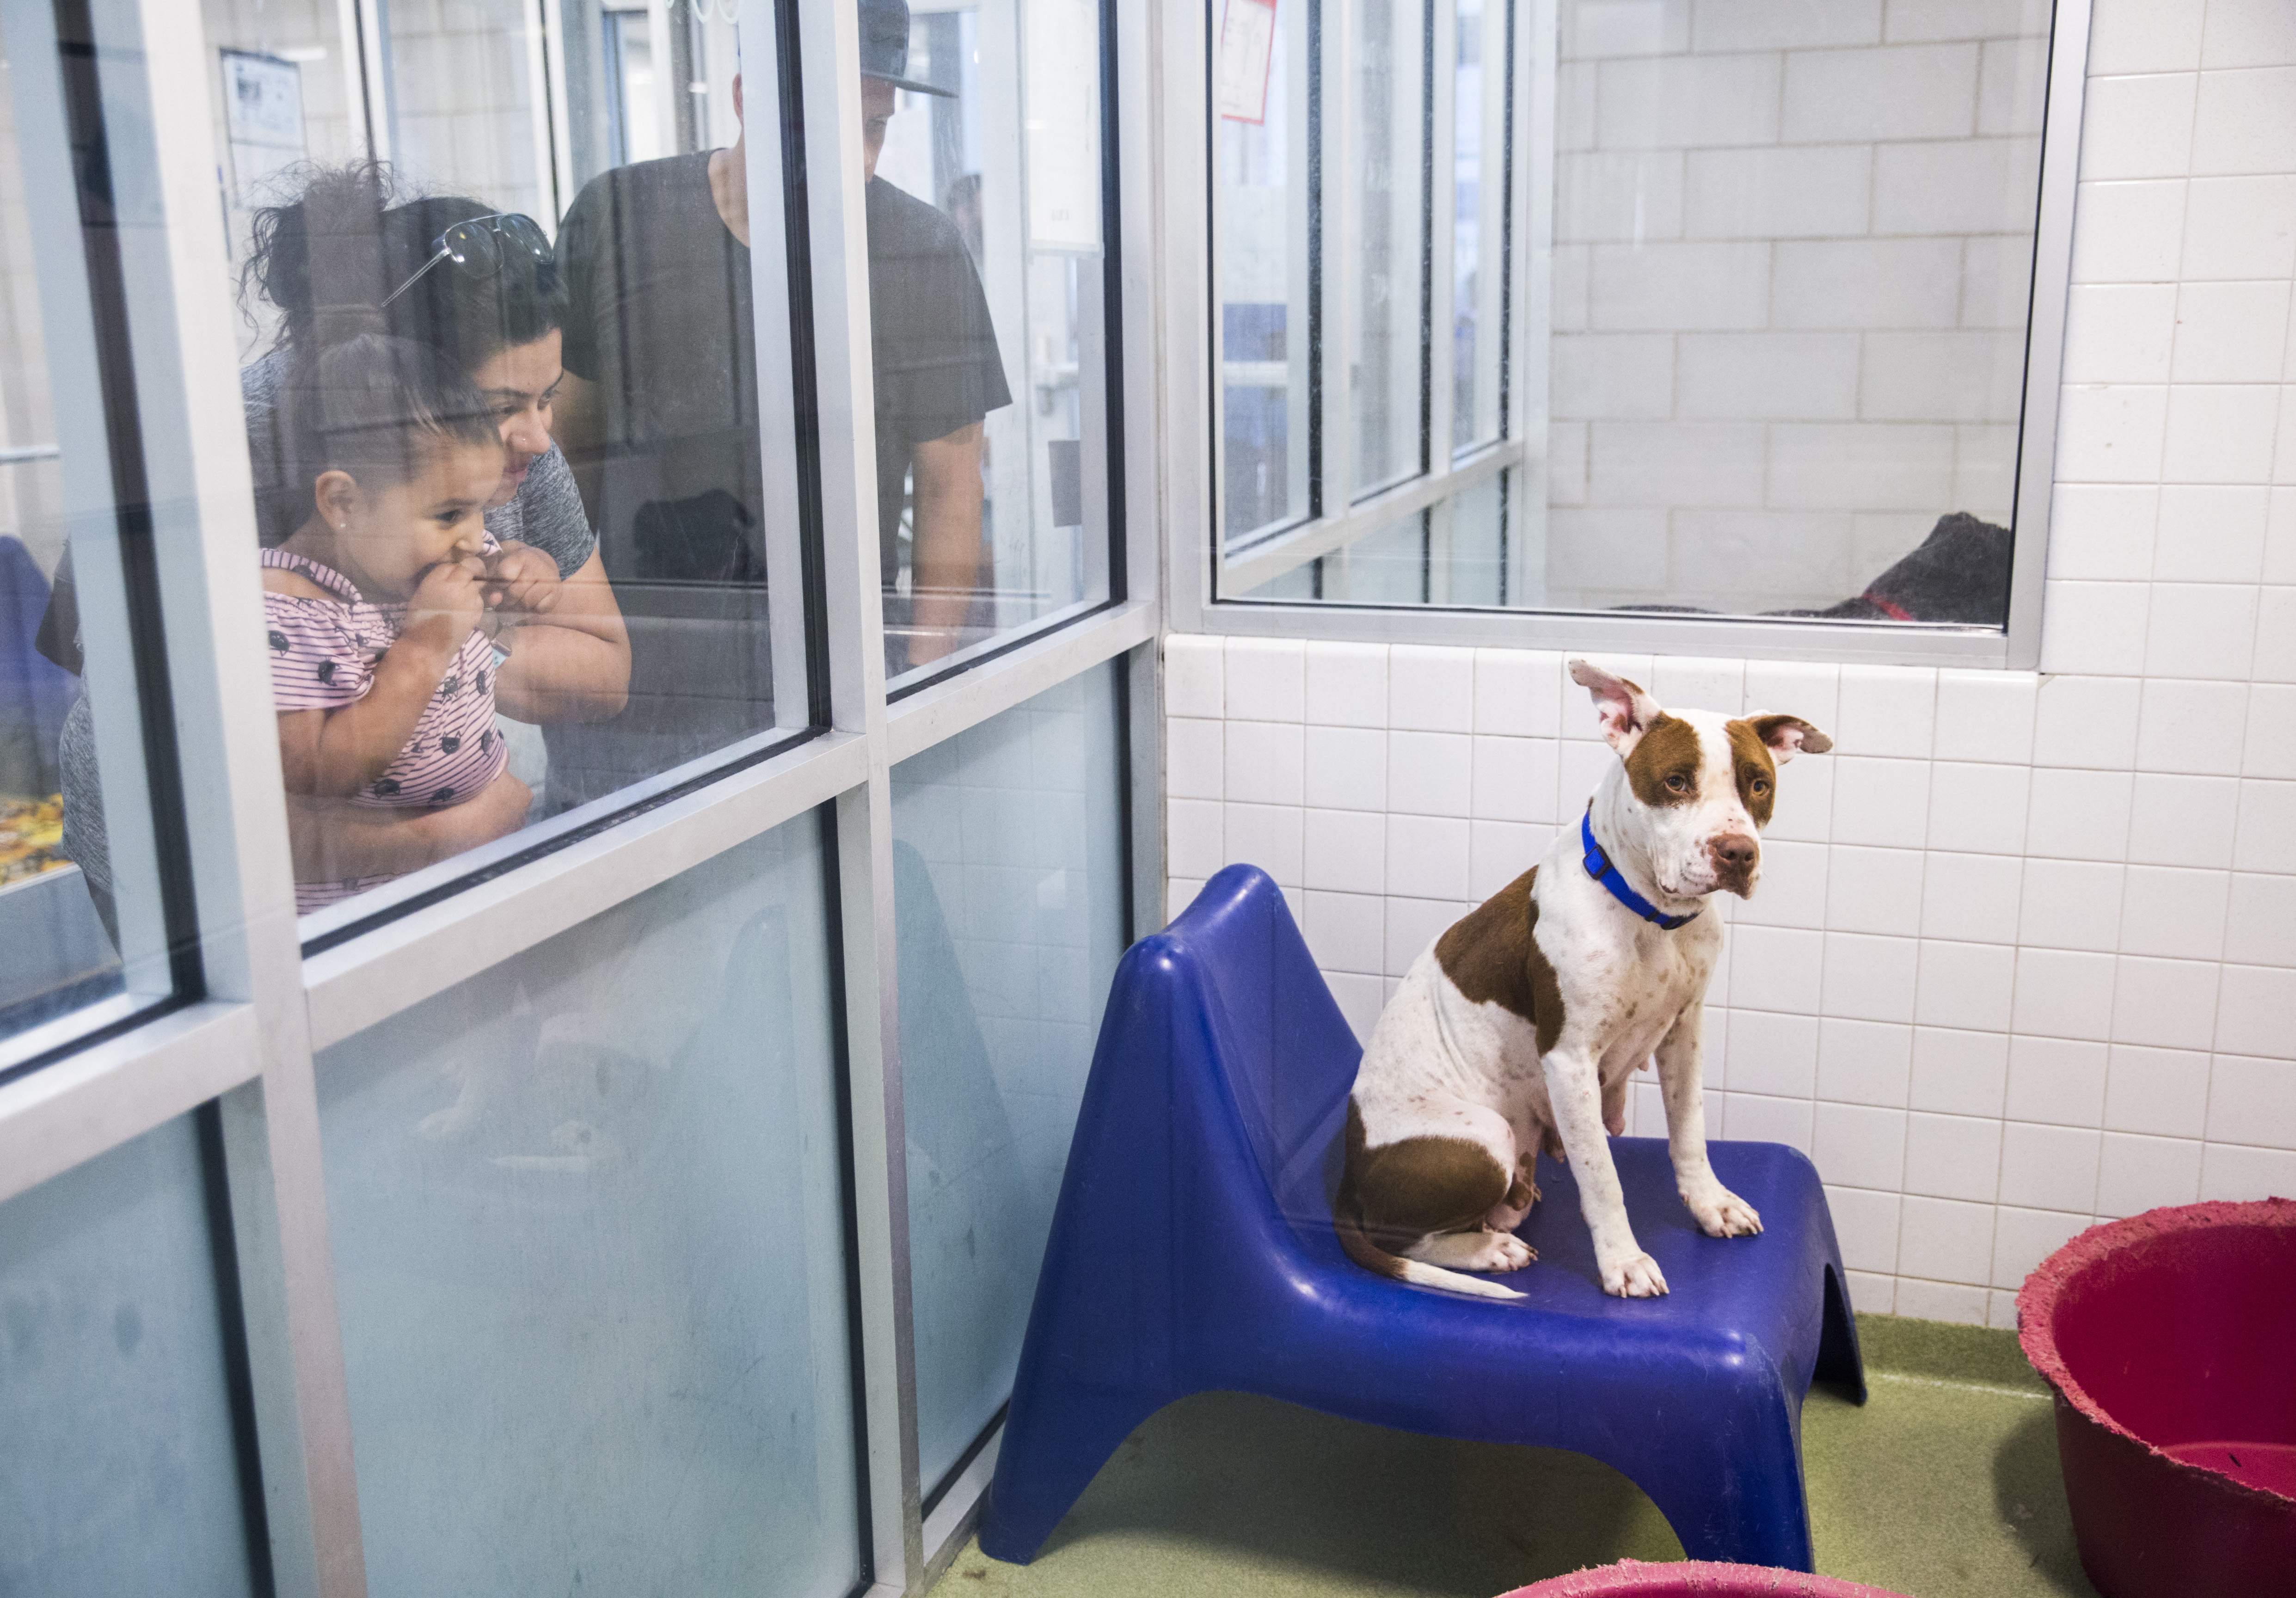 Plano's animal shelter will offer free adoptions for several days in August